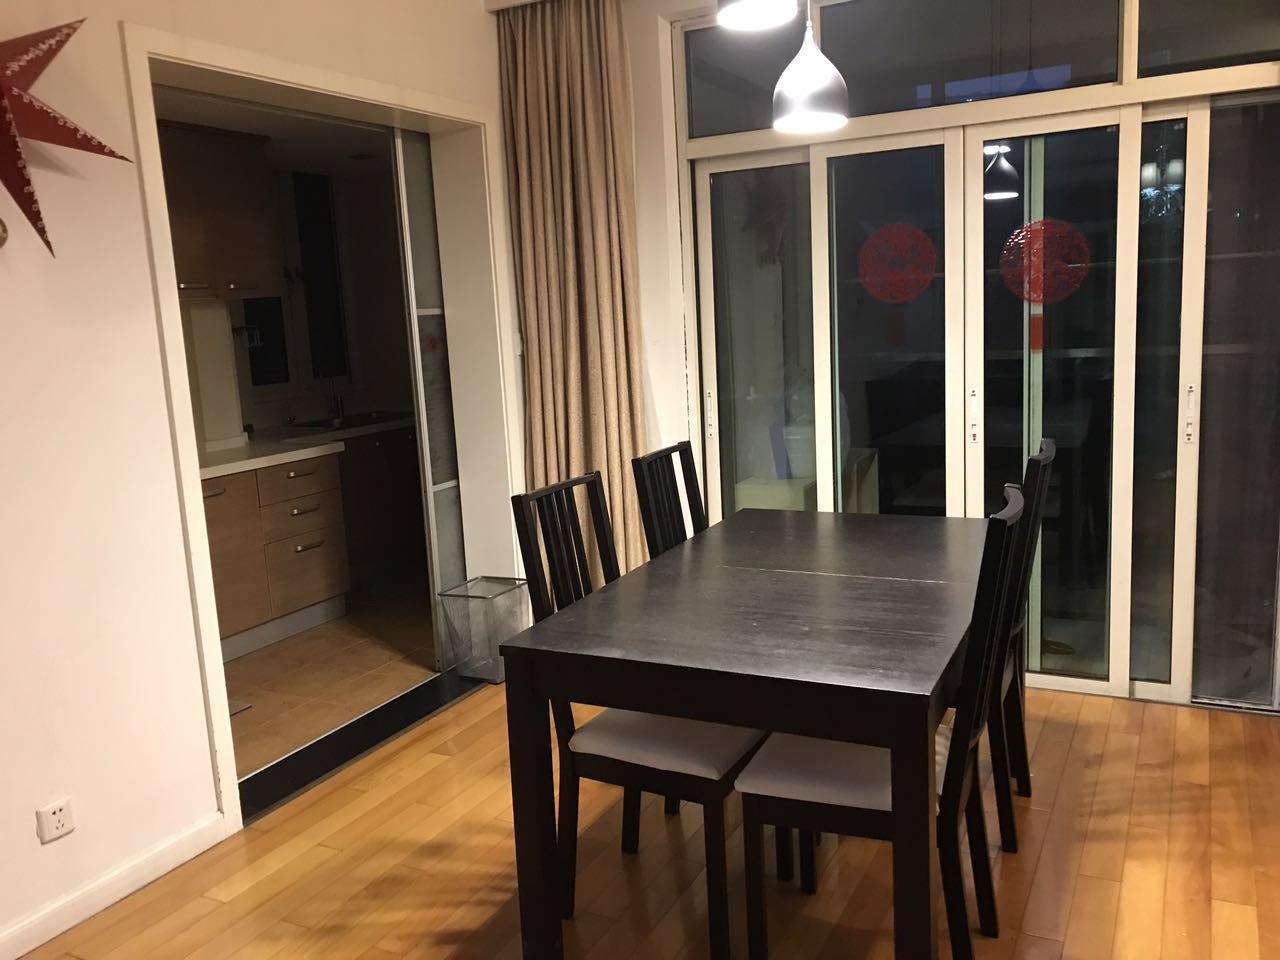 big apartment with cheap price for rent Spacious and well maintained (176sqm) 3bedroom apartment near Nanjing W Rd in Ladoll for rent